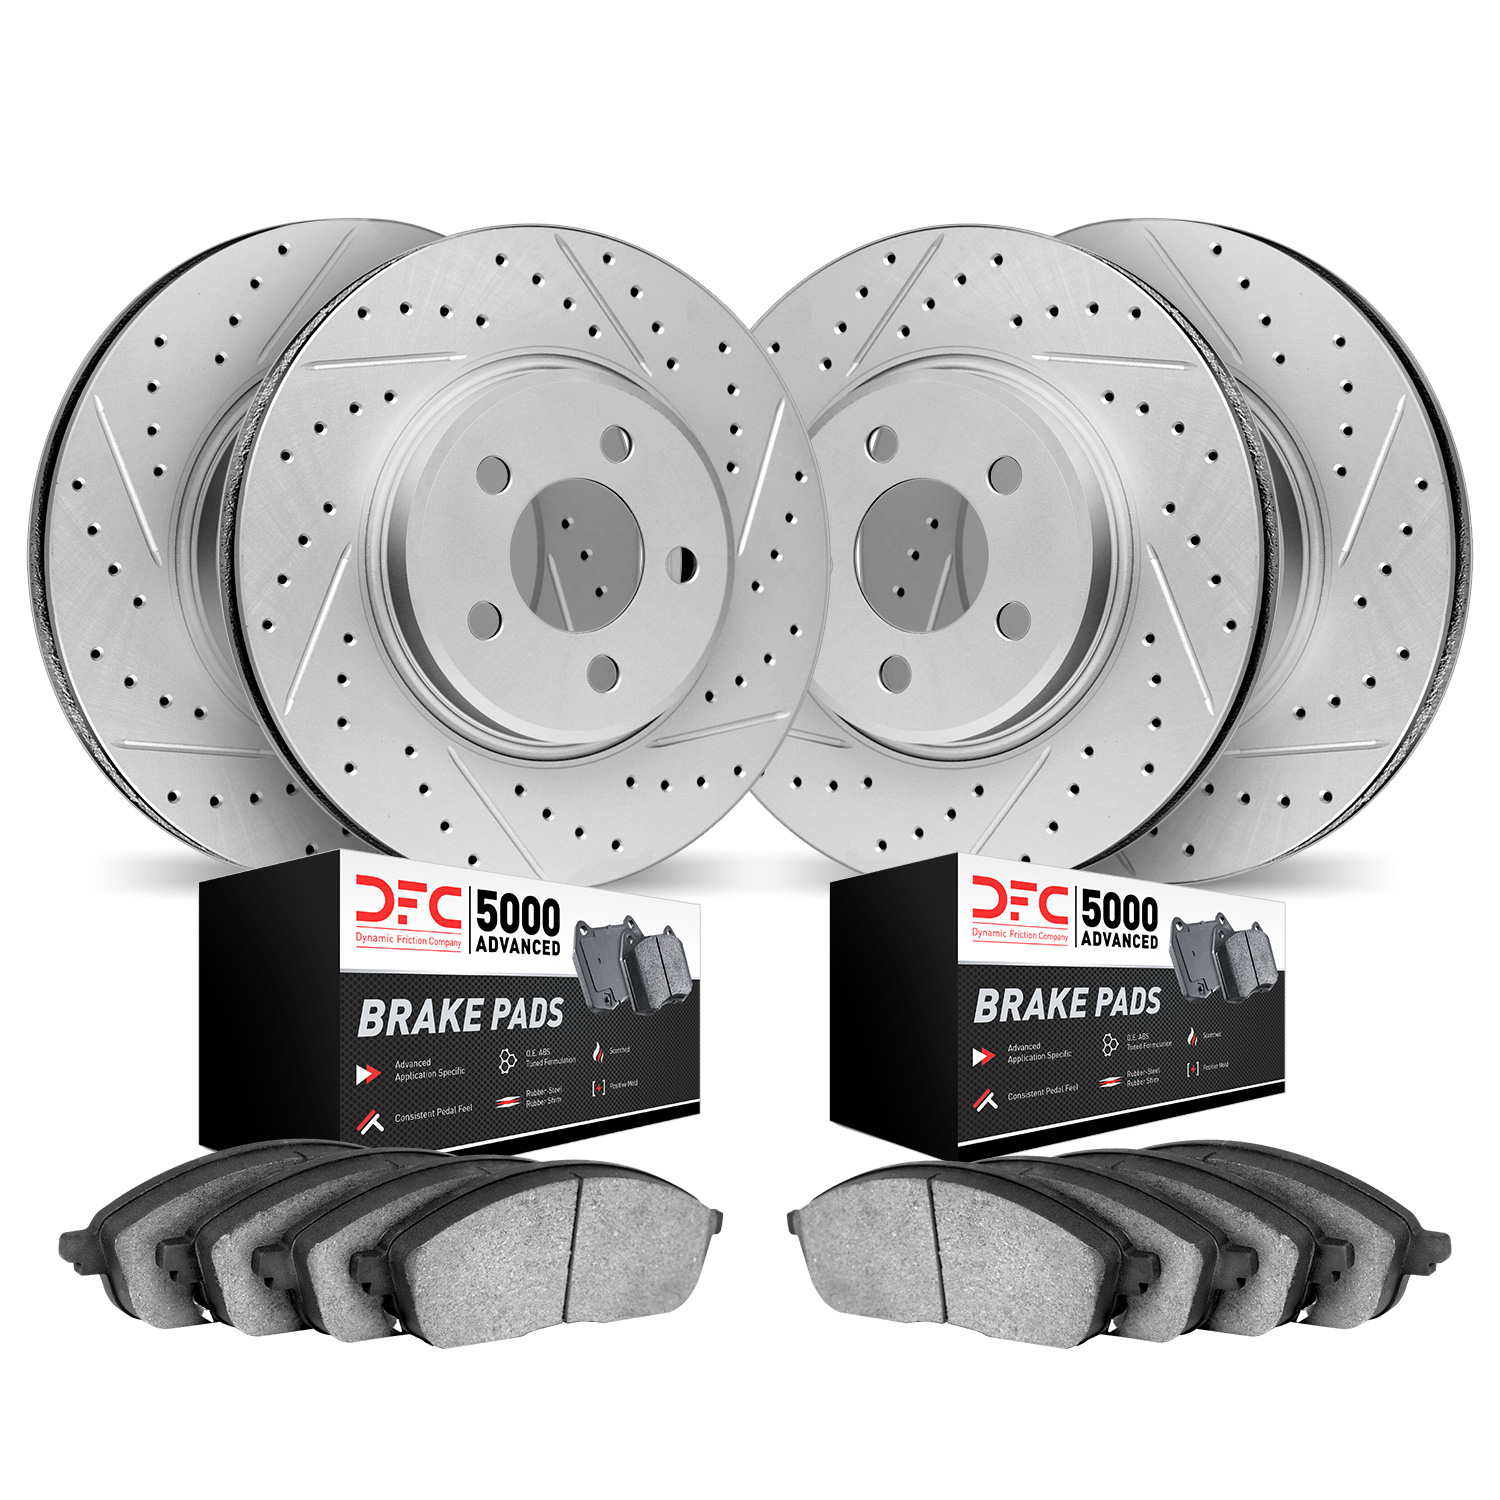 2504-20001 Geoperformance Drilled/Slotted Rotors w/5000 Advanced Brake Pads Kit, 2005-2006 Jaguar, Position: Front and Rear